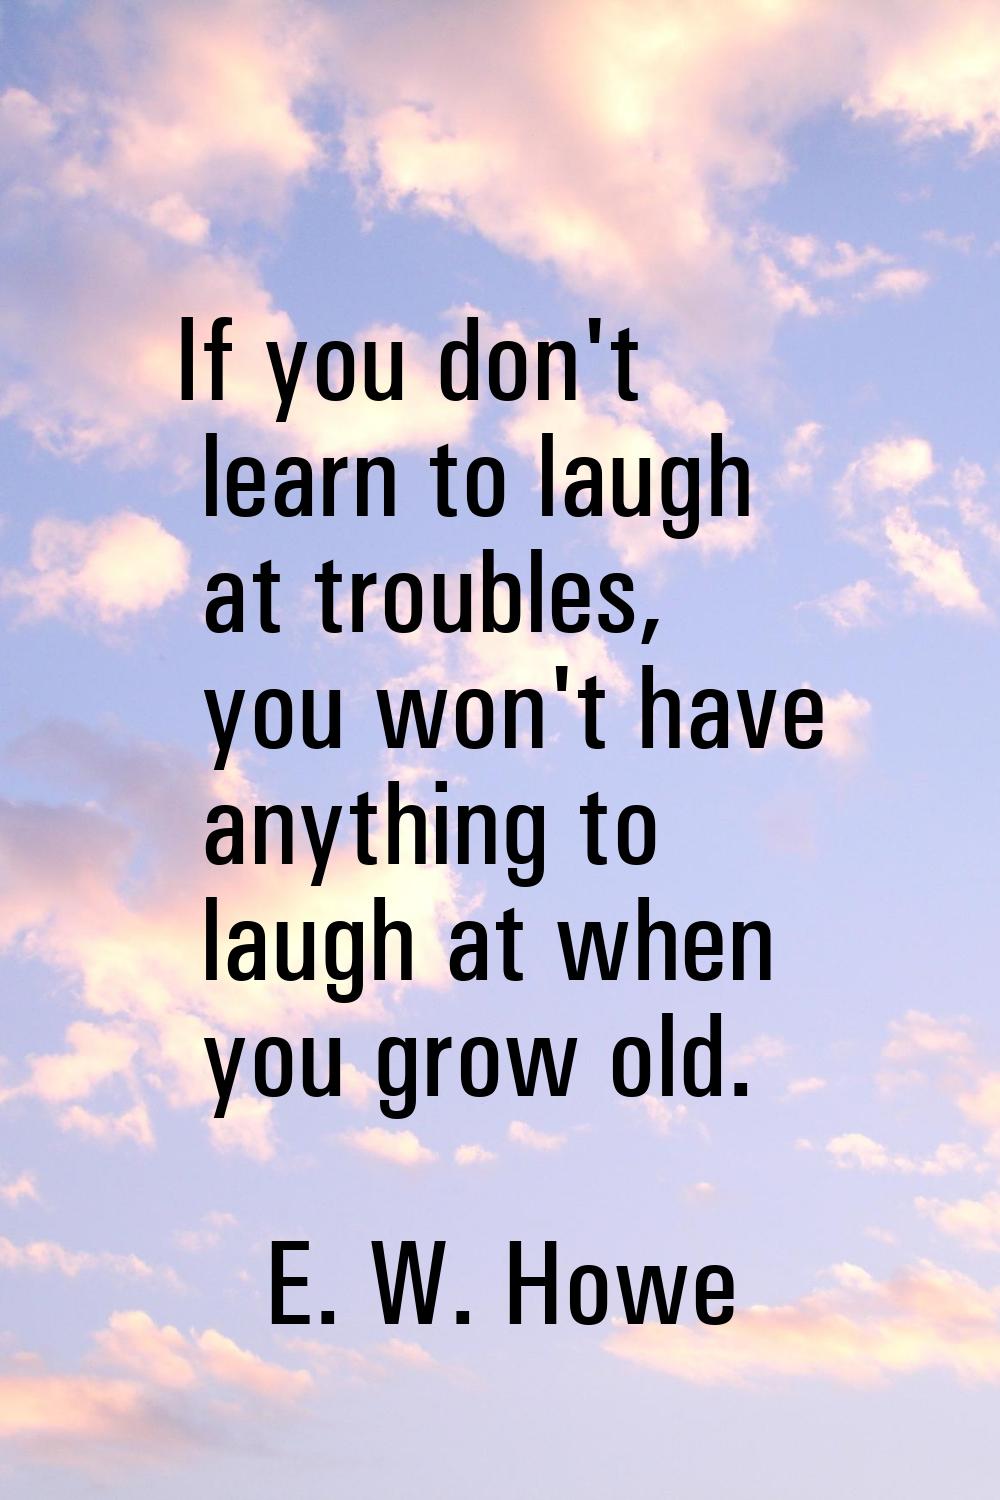 If you don't learn to laugh at troubles, you won't have anything to laugh at when you grow old.